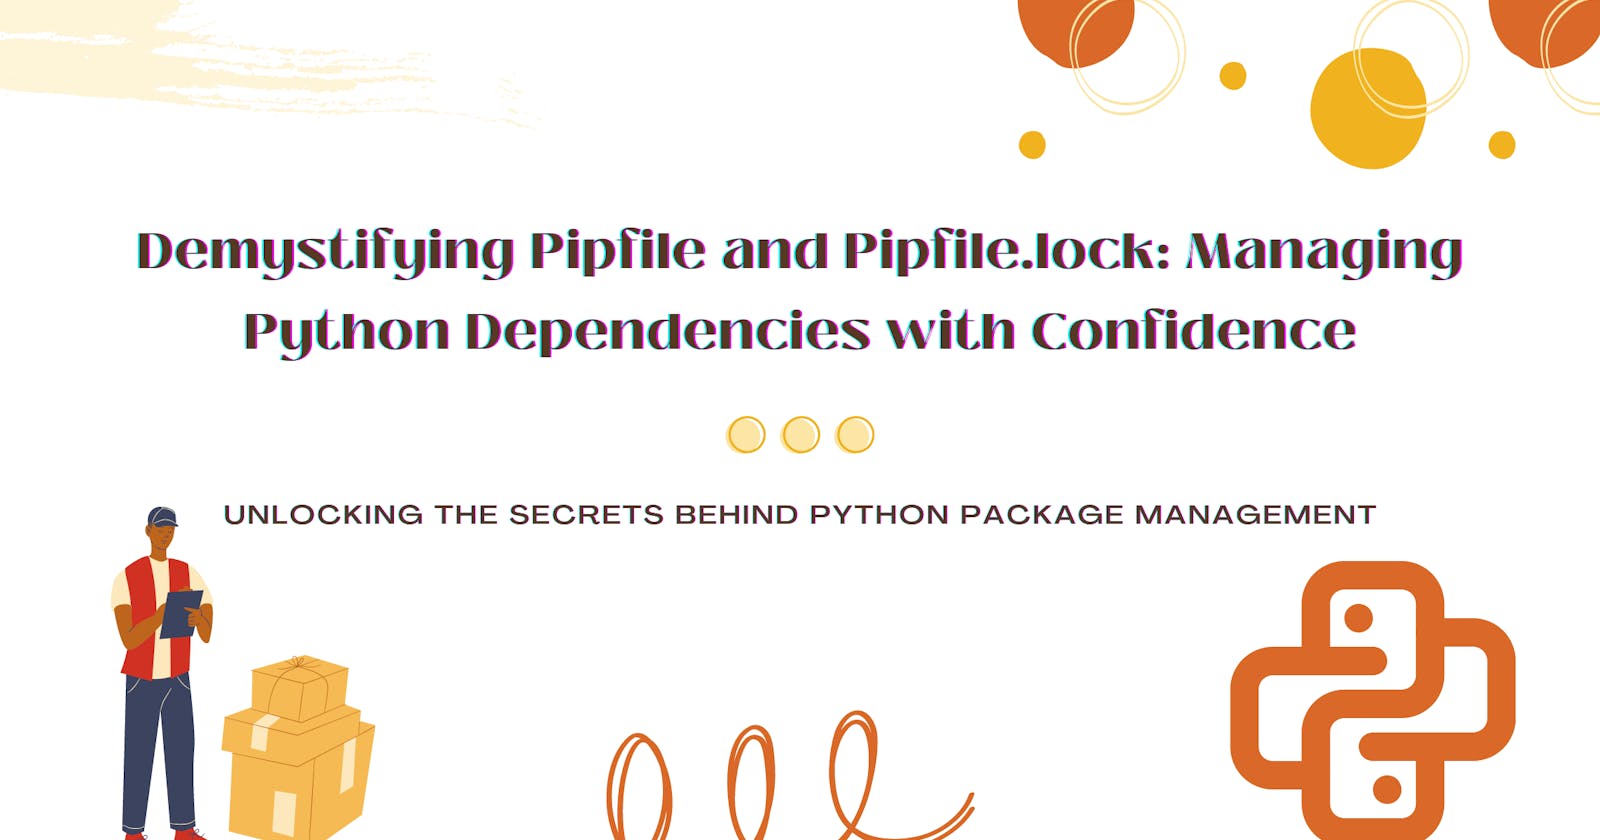 Demystifying Pipfile and Pipfile.lock: Managing Python Dependencies with Confidence